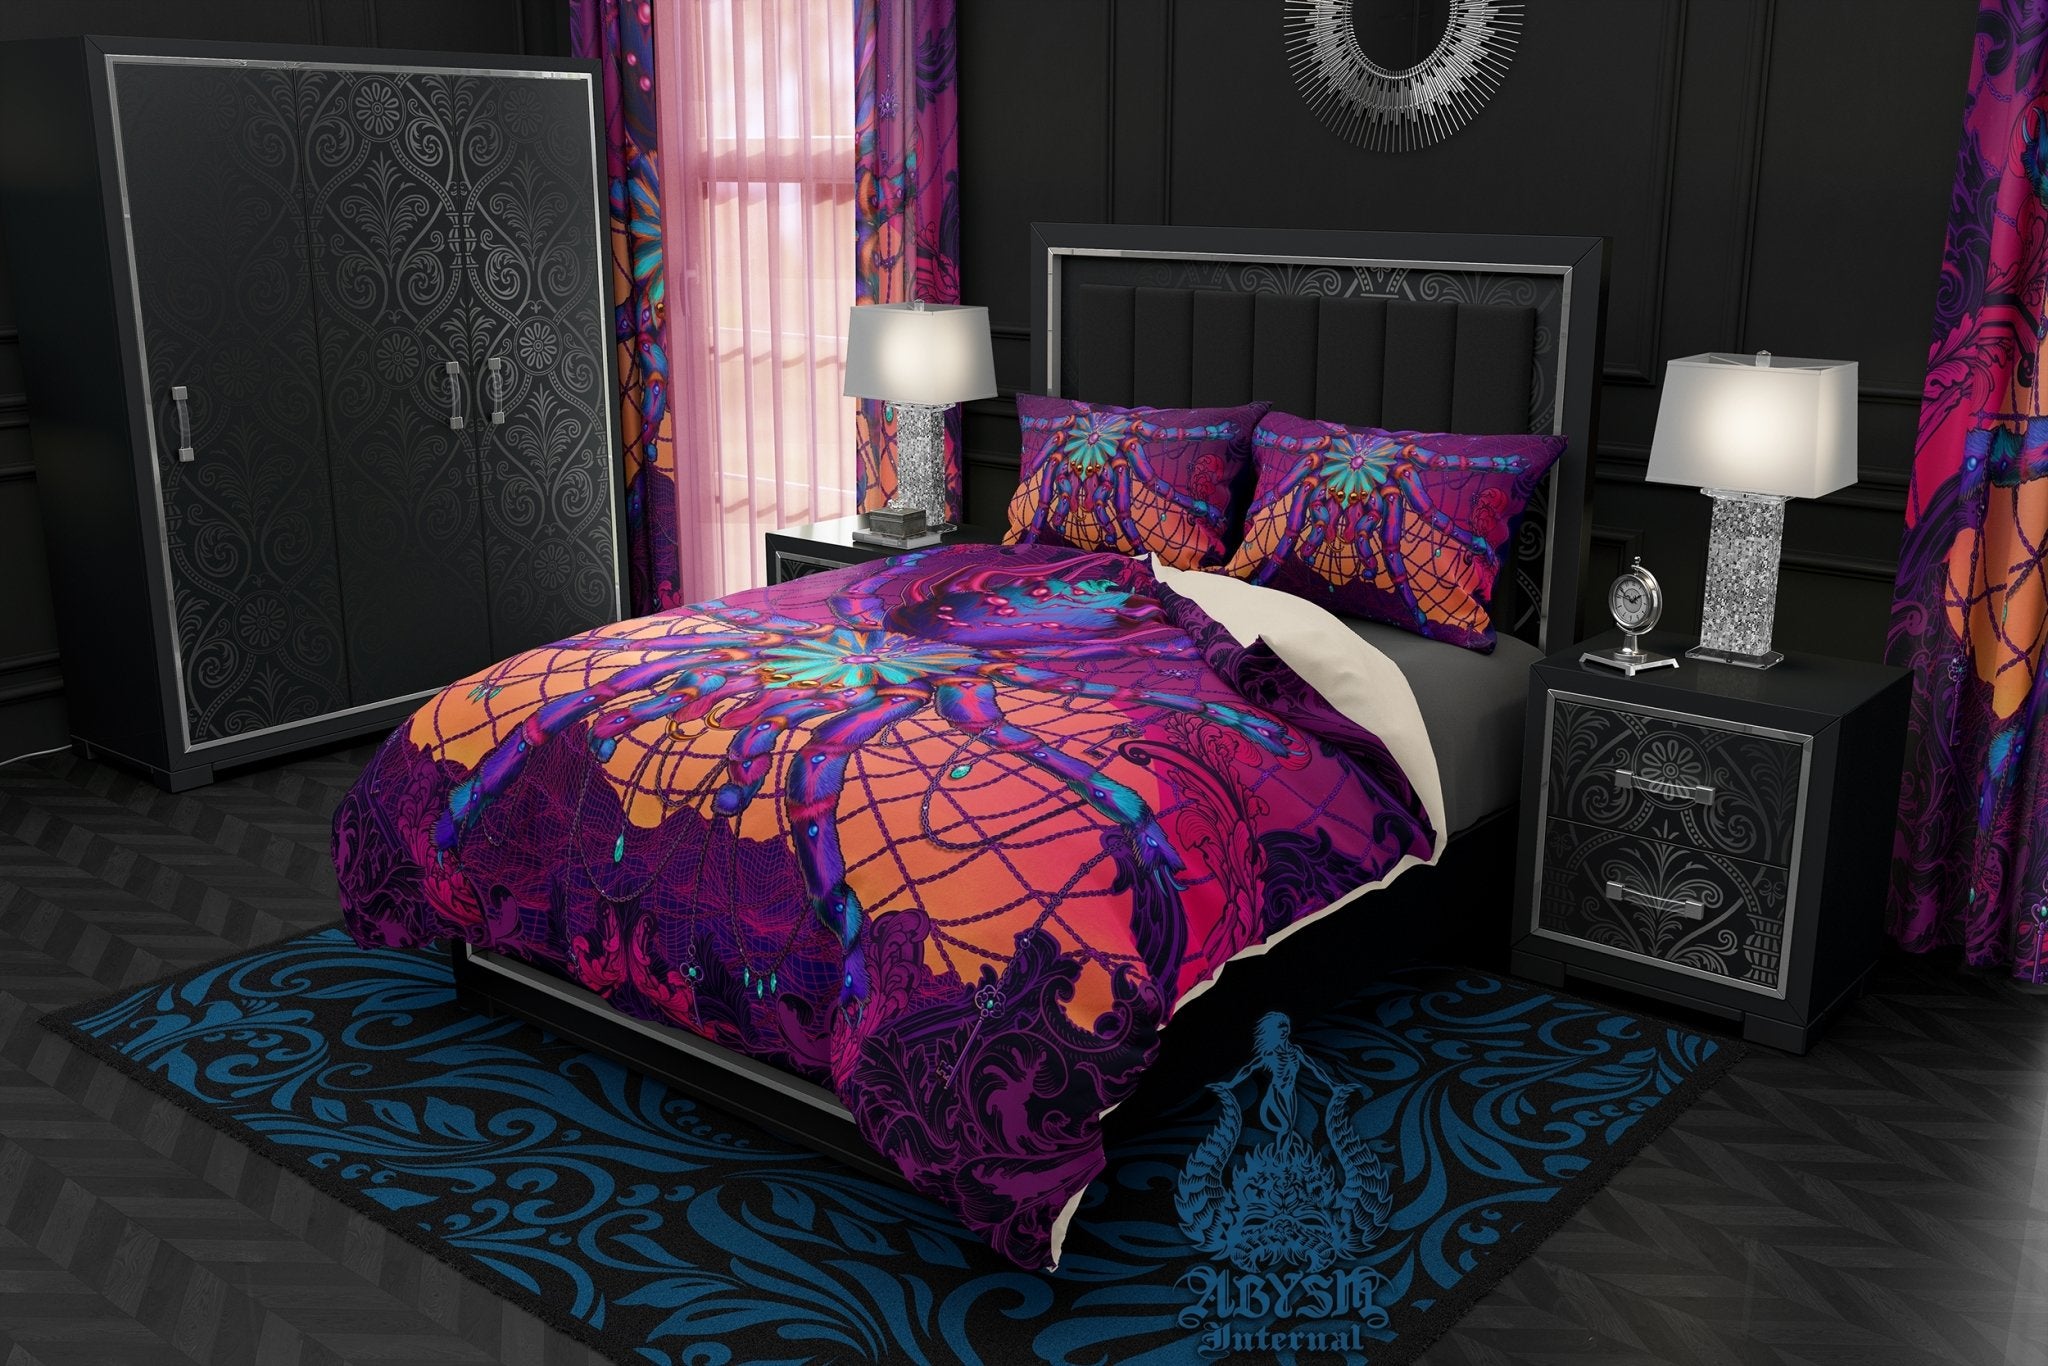 Vaporwave Bedding Set, Comforter and Duvet, Synthwave Bed Cover and Retrowave Bedroom Decor, King, Queen and Twin Size, Gamer Kids 80s Room - Psychedelic Spider - Abysm Internal